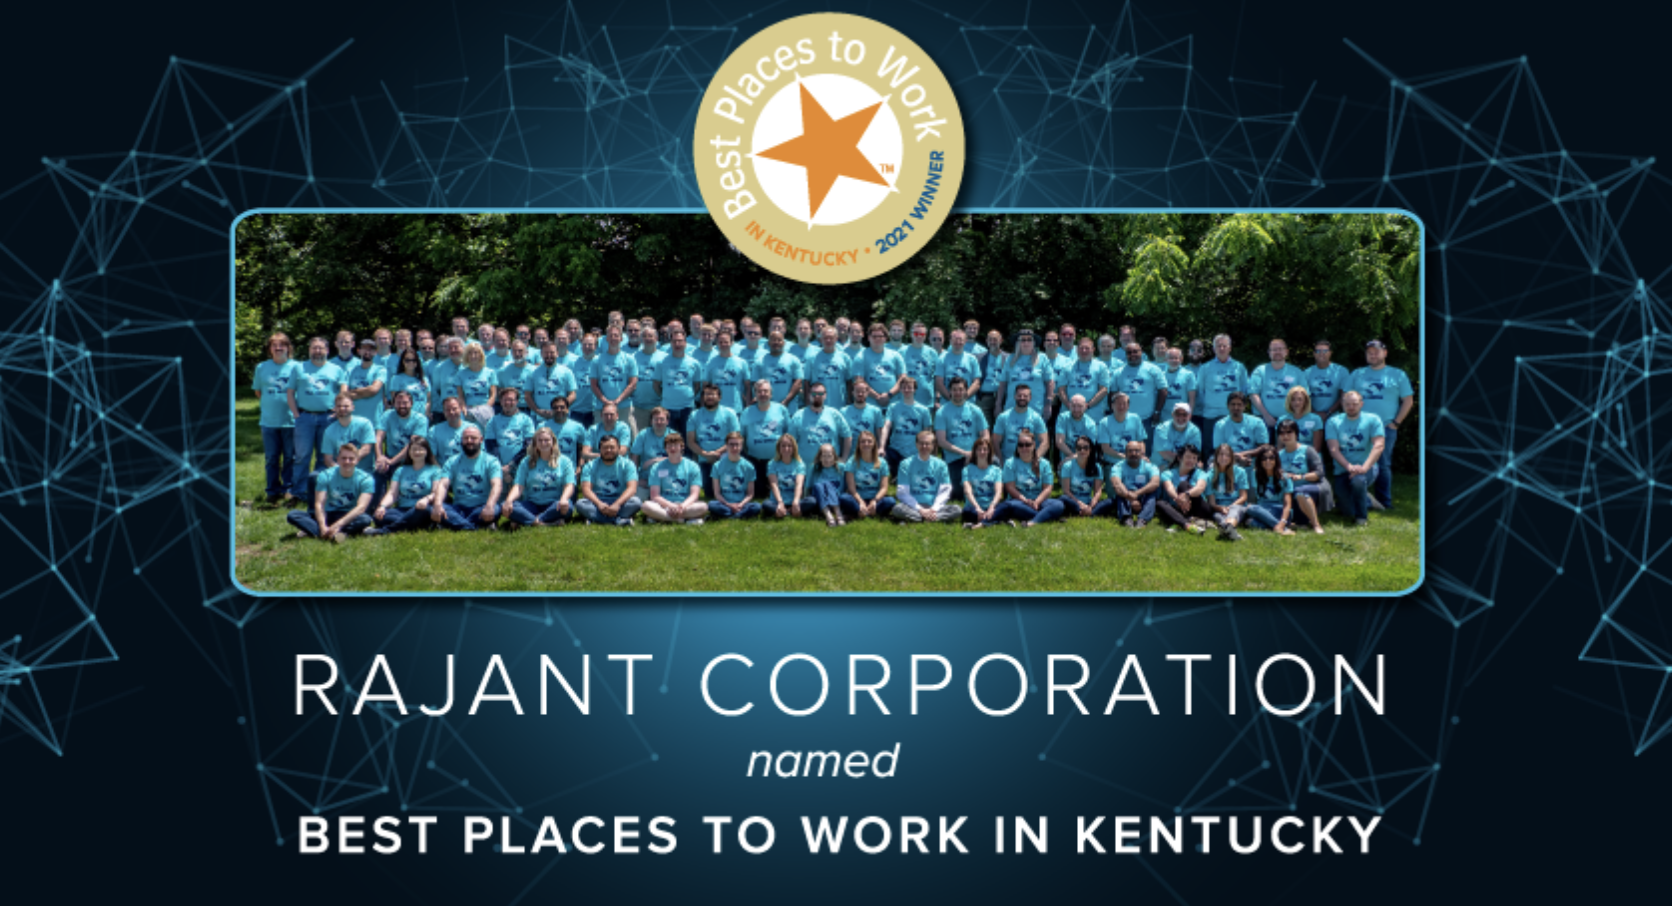 Rajant Corporation, headquartered in Malvern, Pennsylvania, with manufacturing in Morehead, Kentucky is one of the 2021 "Best Places to Work in Kentucky". This is the first year applying and receiving the distinction. 